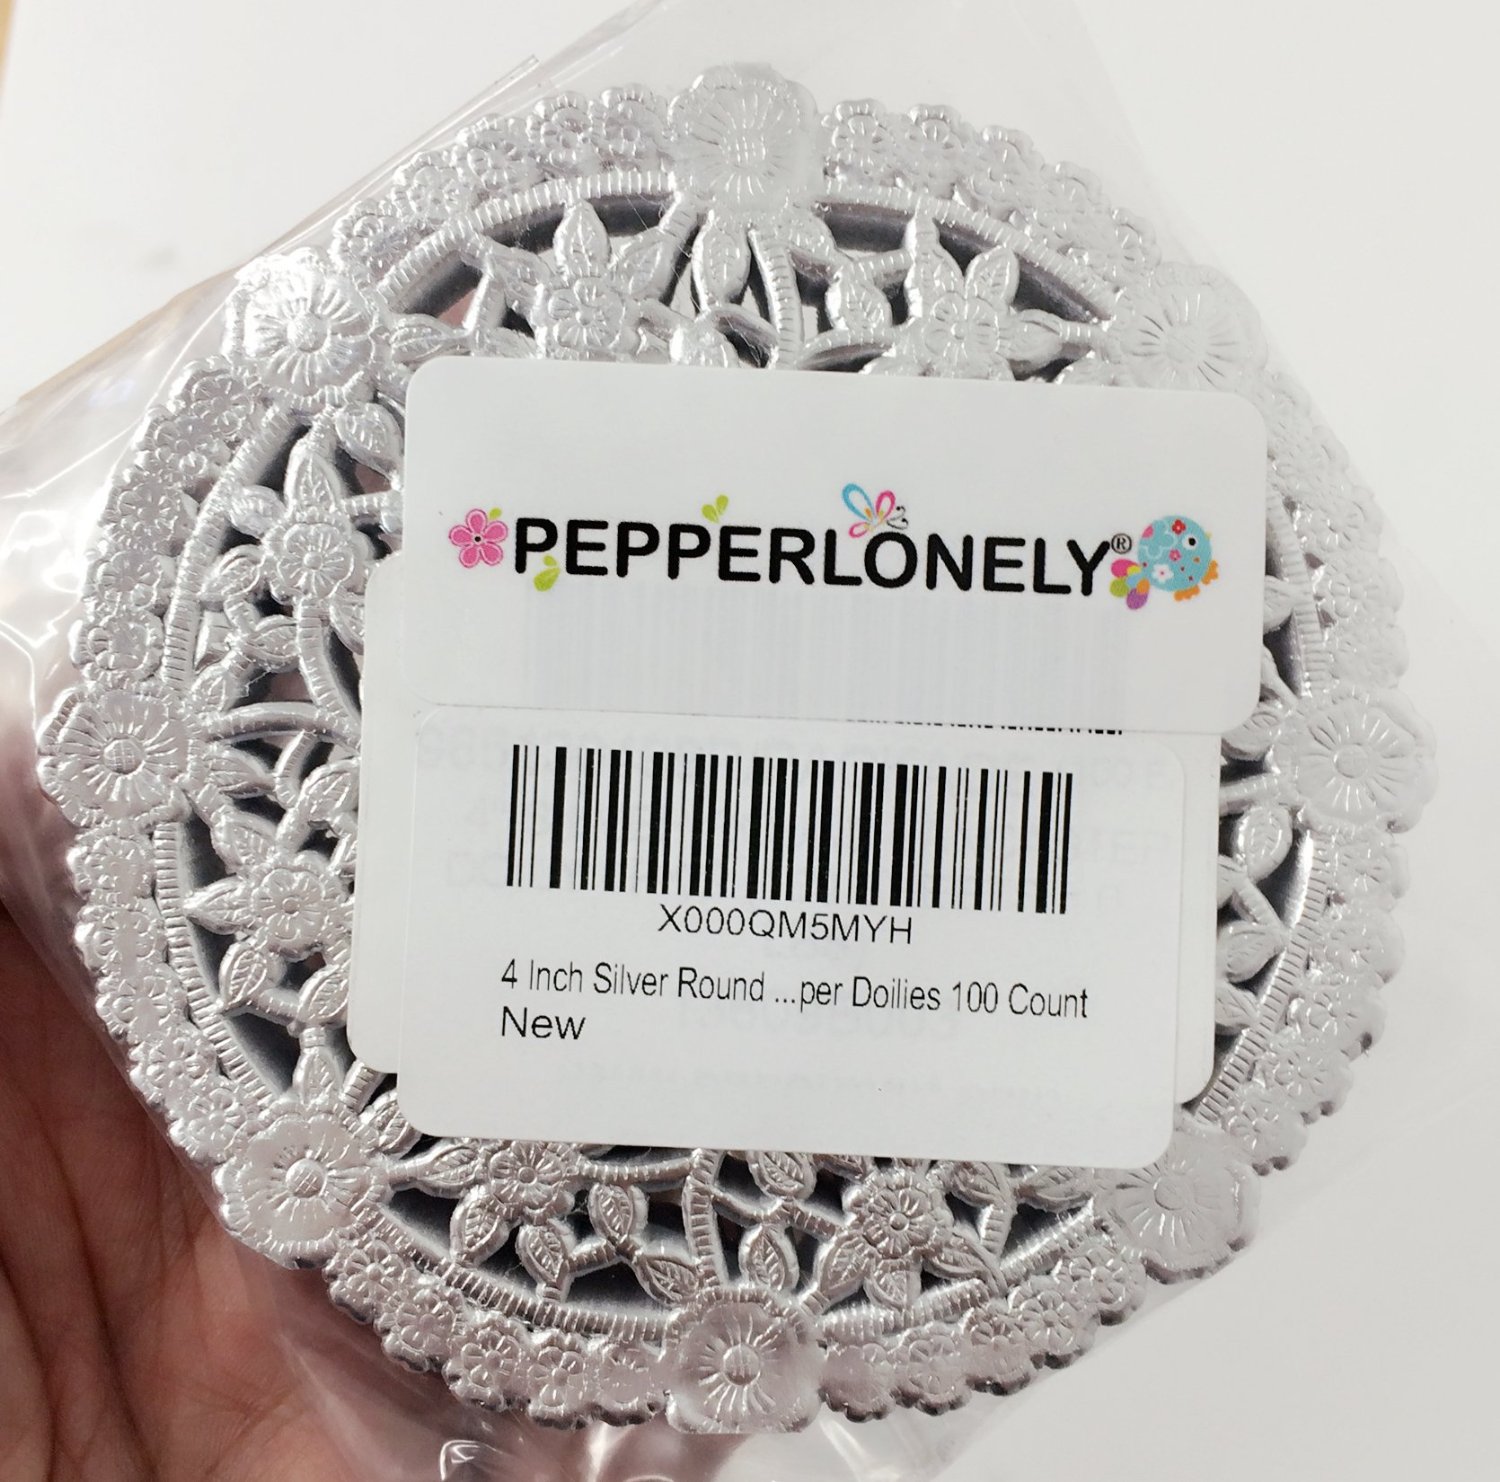 4 Inch Silver Round Lancaster Paper Doilies 100 Count – PEPPERLONELY –  Beads, Buttons, Crafts, Ribbons, Jewelry Findings